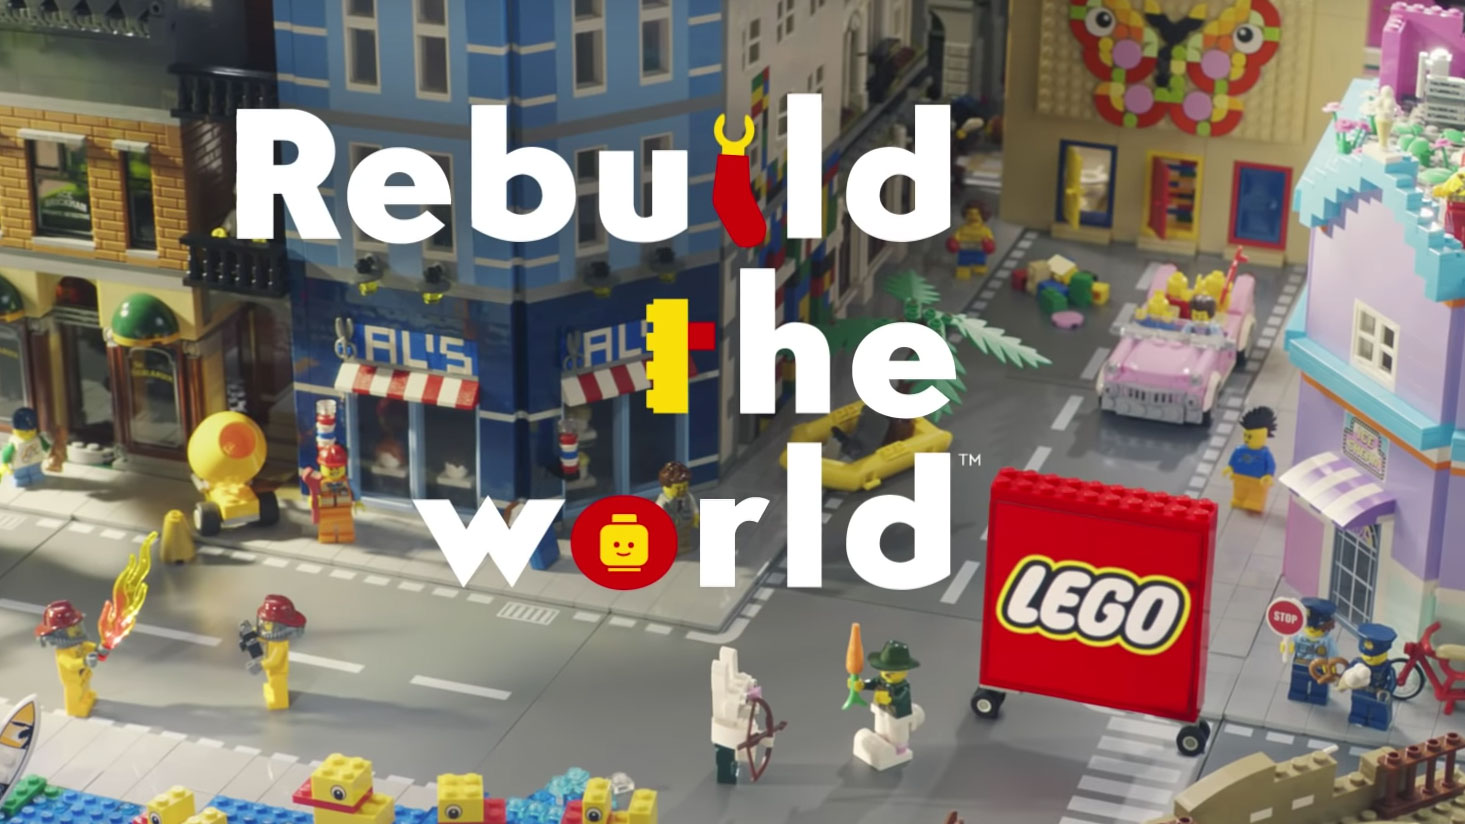 blod Slået lastbil Risikabel Lego's stunning new ads are a creative force for good | Creative Bloq